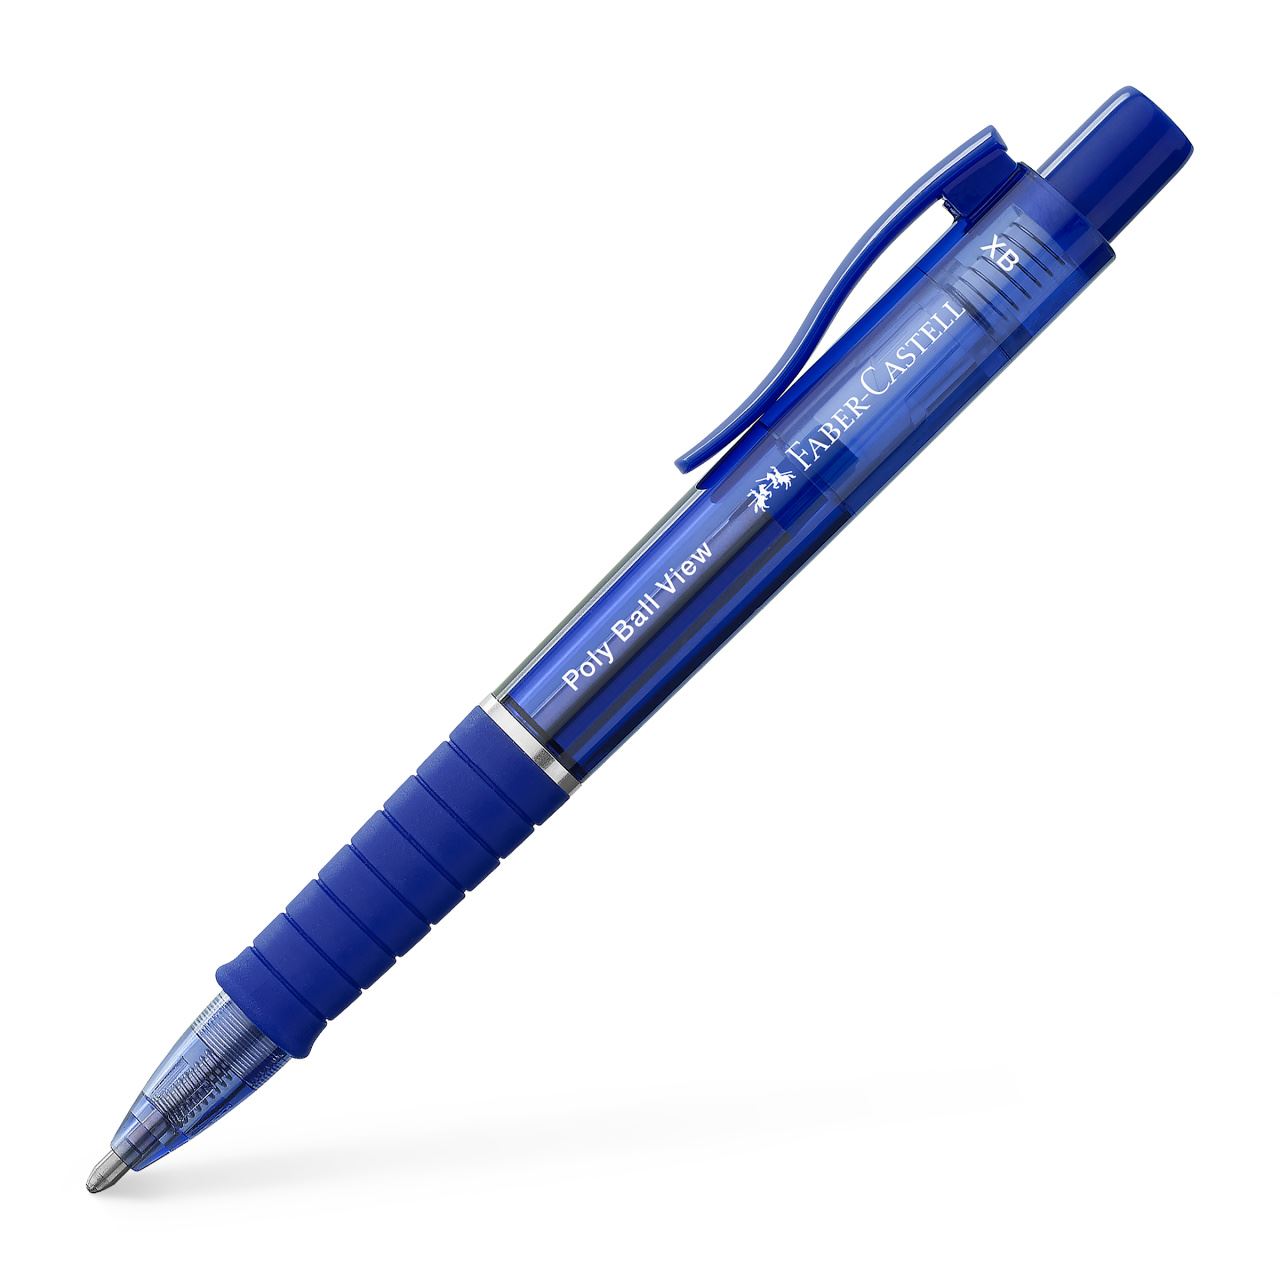 Faber-Castell - Bolígrafo Poly Ball View admiral blue